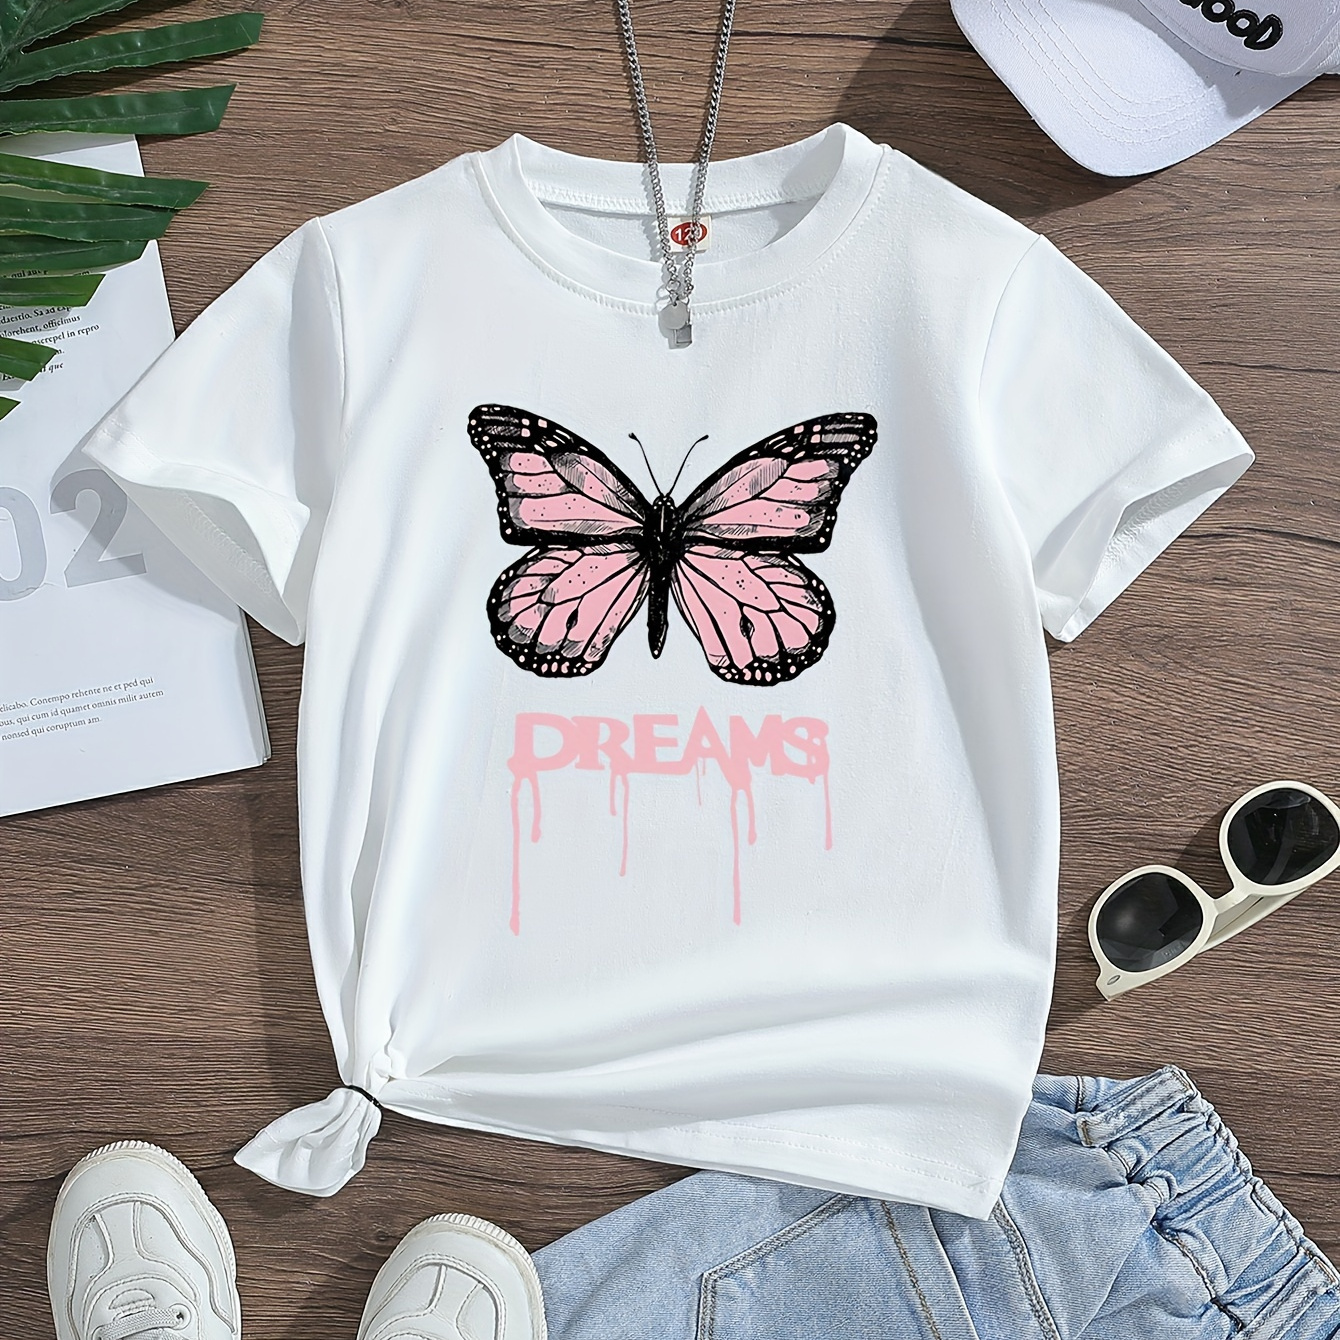 

Dreams & Butterfly Graphic Print, Girls' Casual & Comfy Crew Neck Short Sleeve Cotton T-shirt For Spring & Summer, Girls' Clothes For Outdoor Activities